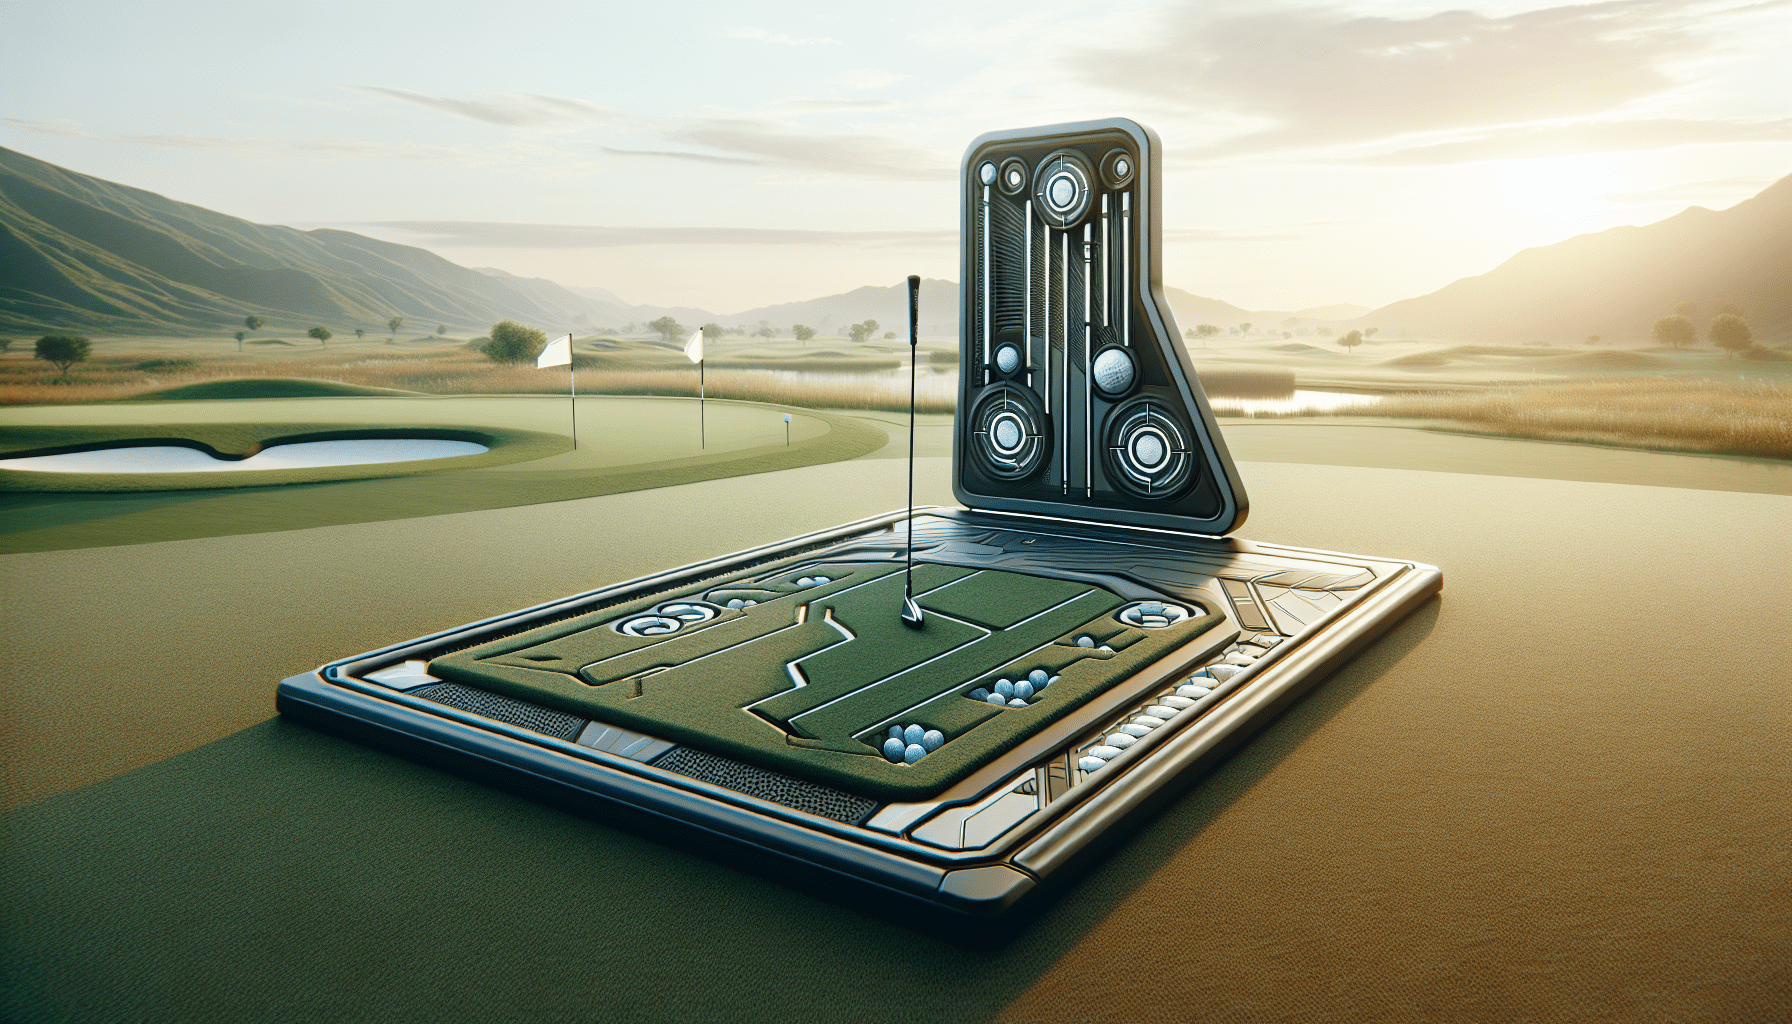 The Ultimate Golf Training Mat